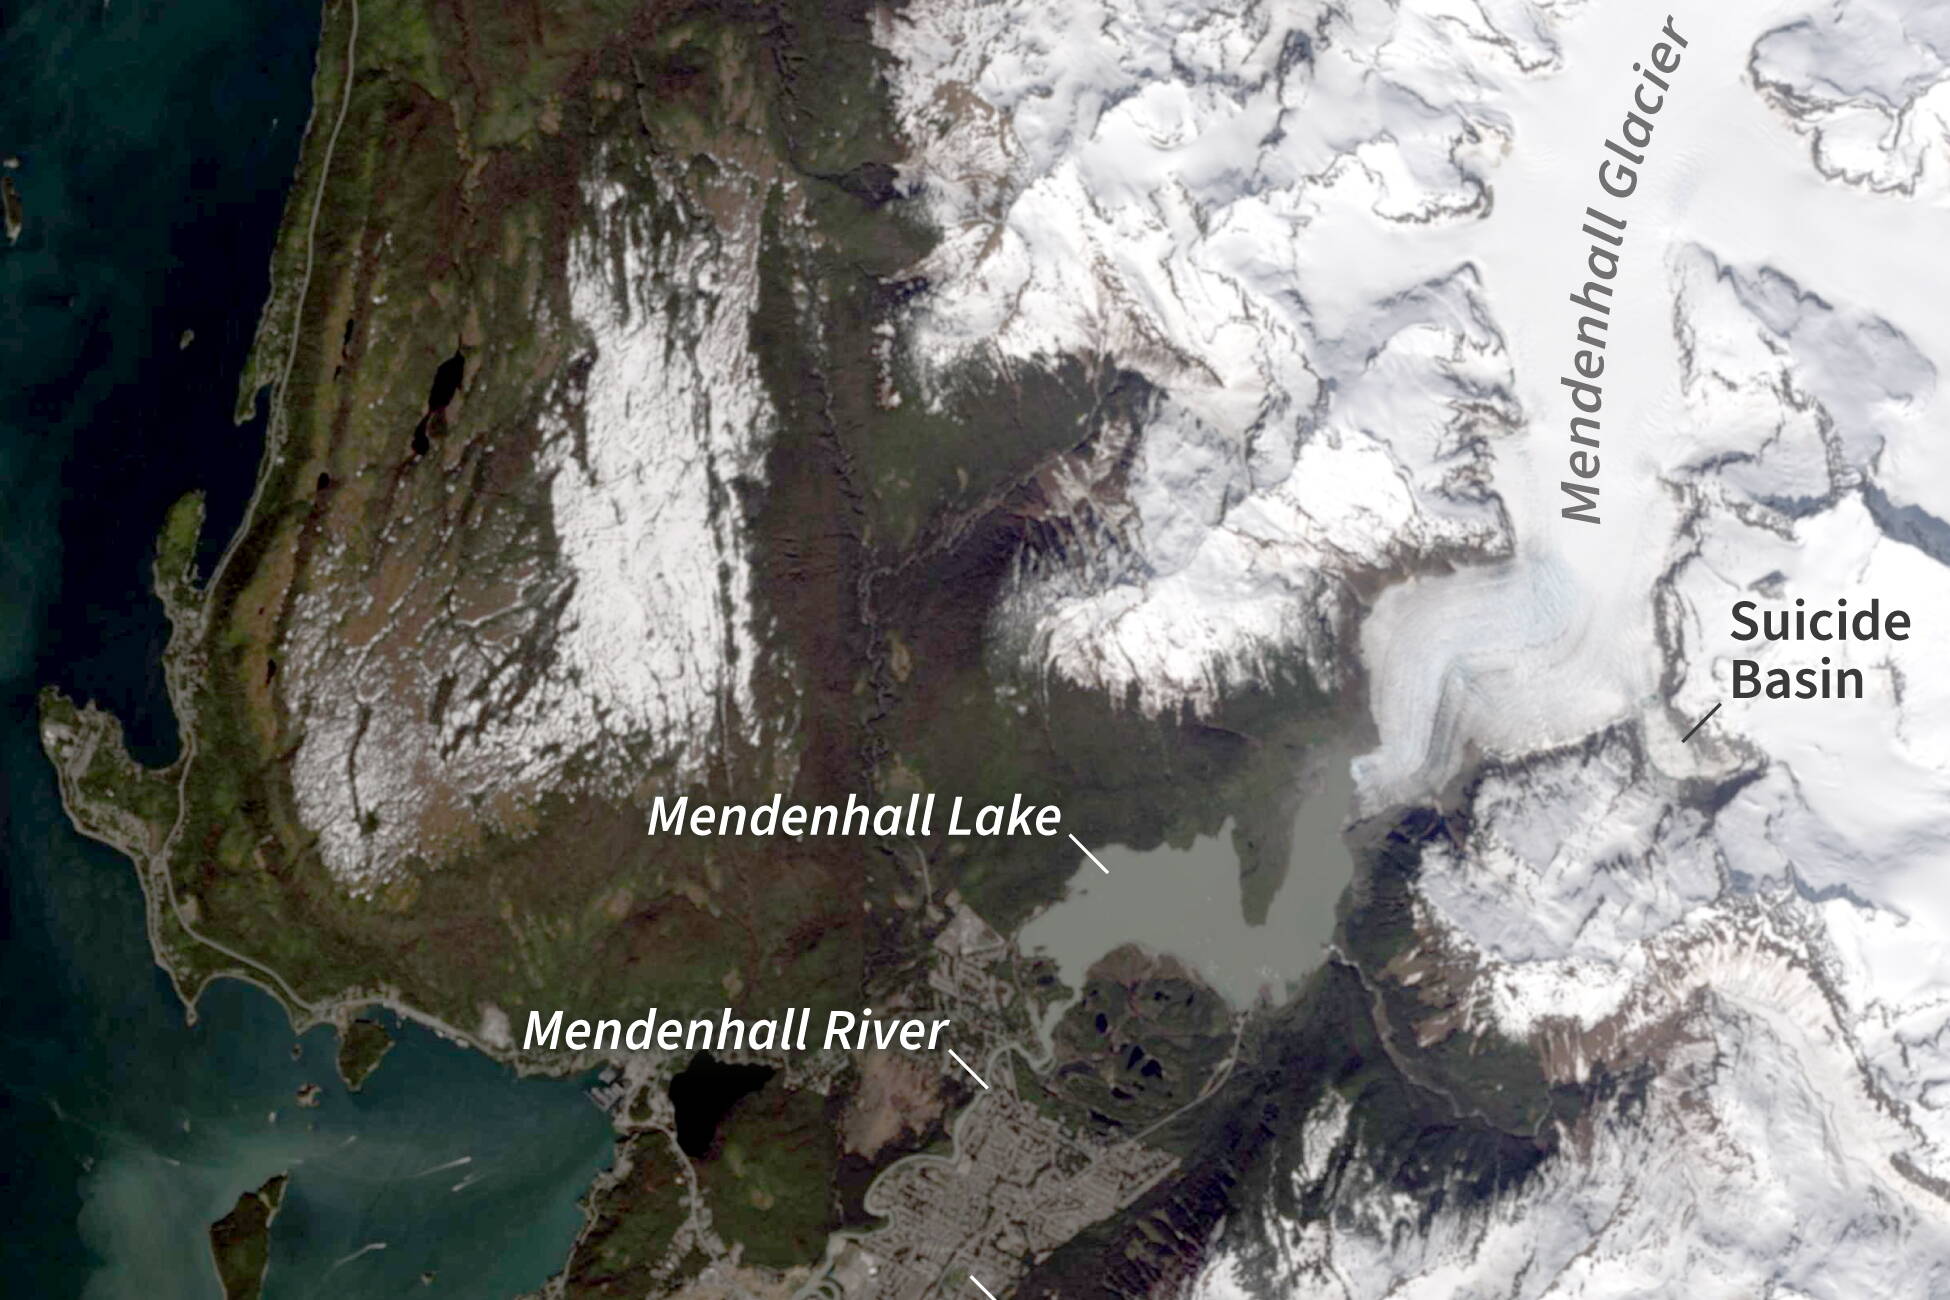 A map shows the location of Suicide Basin, an ice dam which since 2011 has released water into the Mendenhall Lake and River in an annual cycle known as a jökulhlaup. (National Oceanic and Atmospheric Administration)